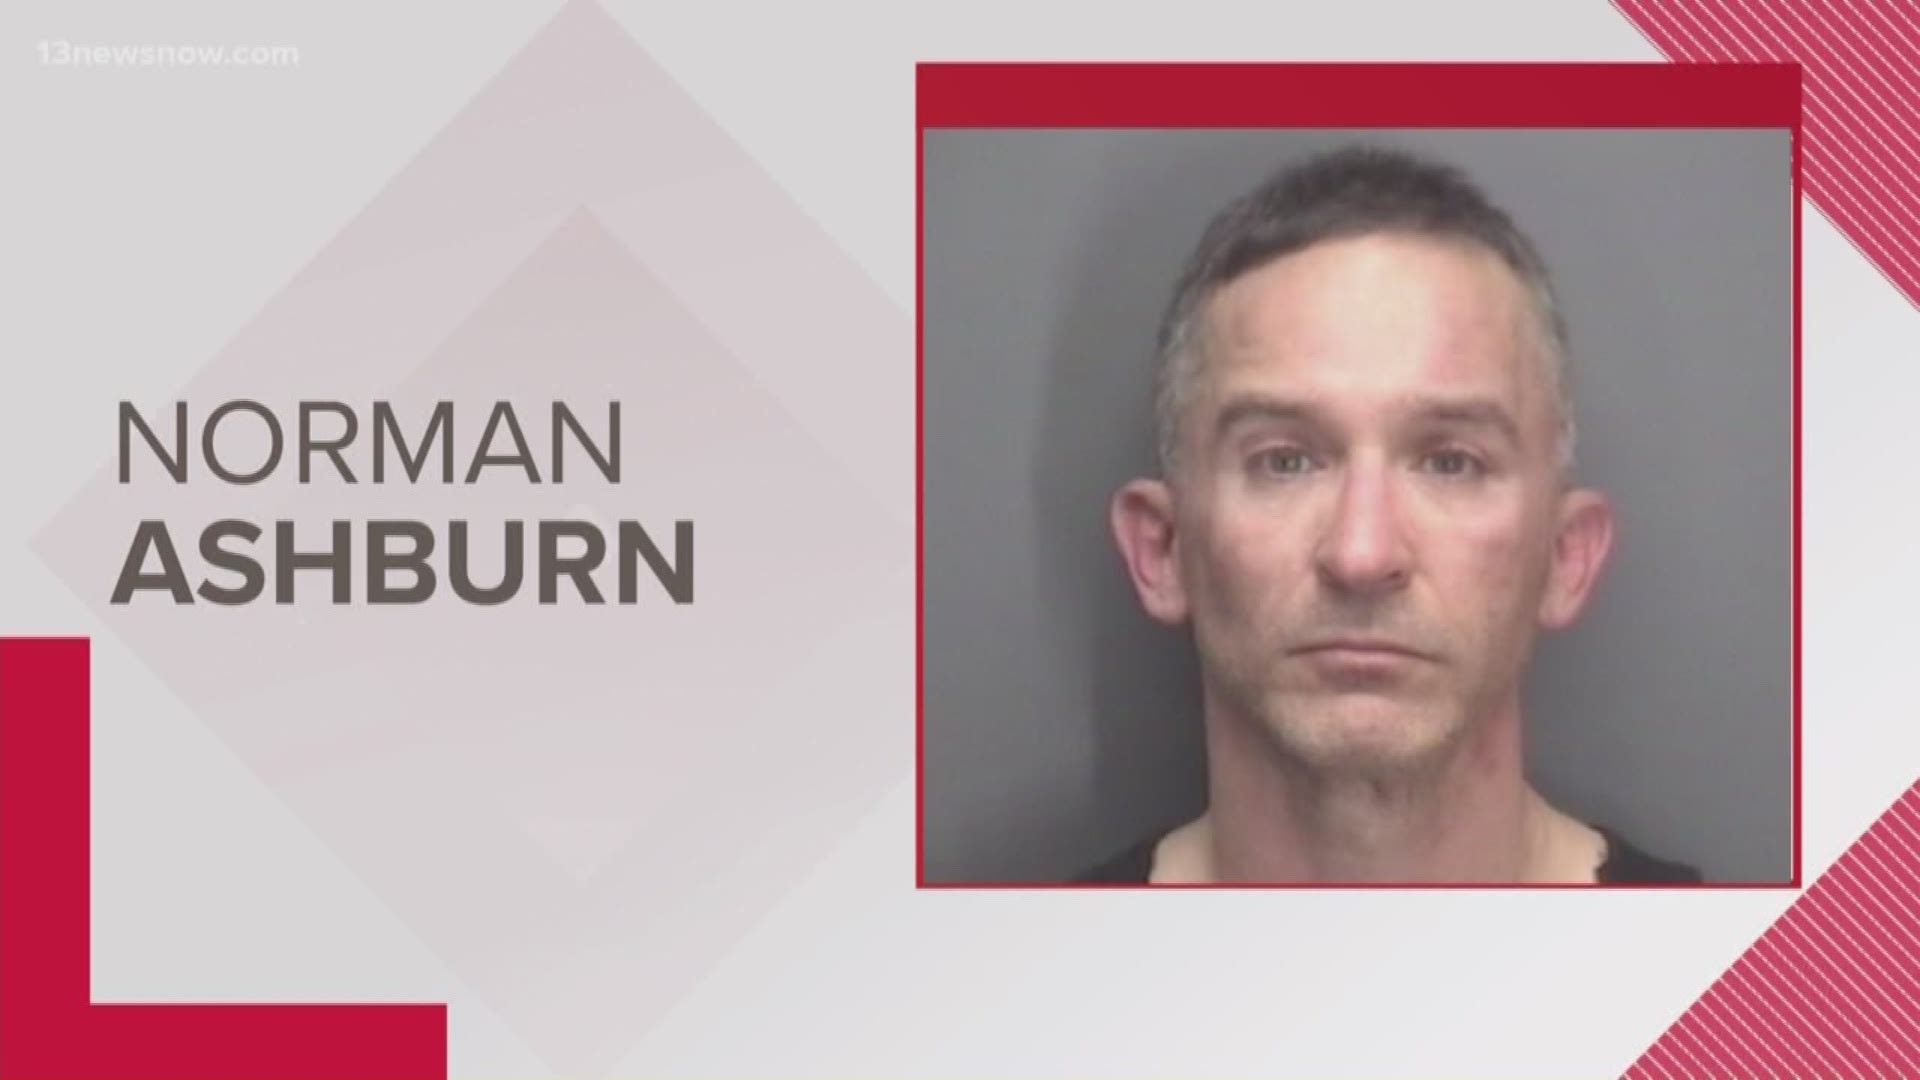 After security told Norman Ontague Ashburn III he couldn't bring a gun into the emergency room, he allegedly pulled out and used a can of pepper spray.